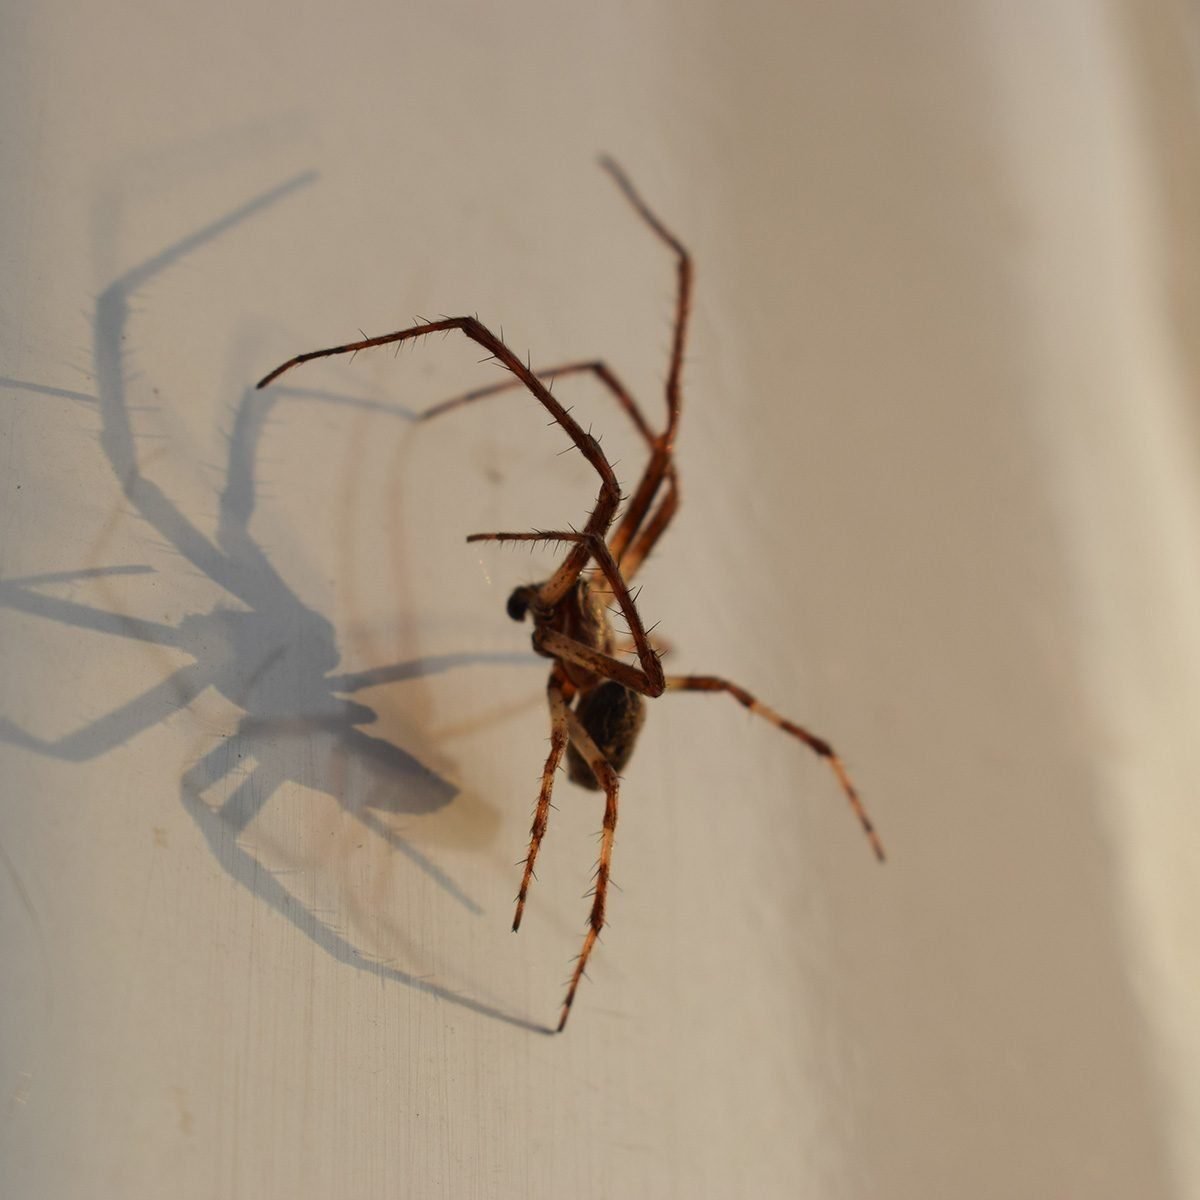 19 Interesting Facts About Spiders | The Family Handyman